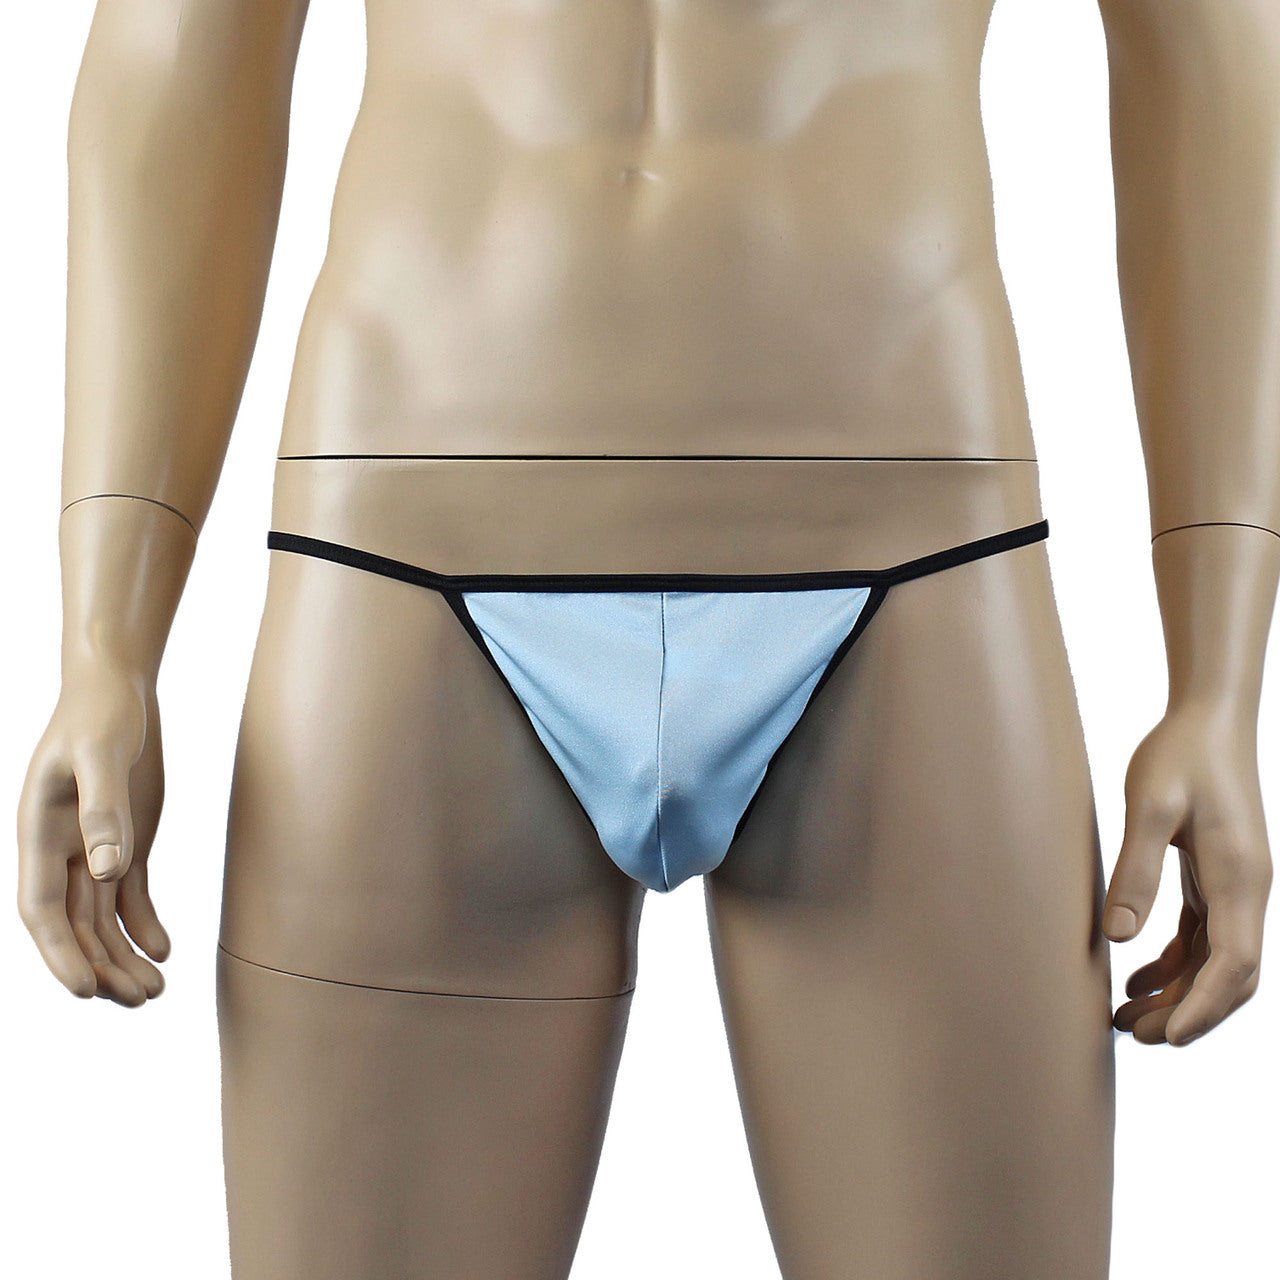 Mens Twinkle Lingerie Pouch G string with Triangle Back & Bow Light Blue